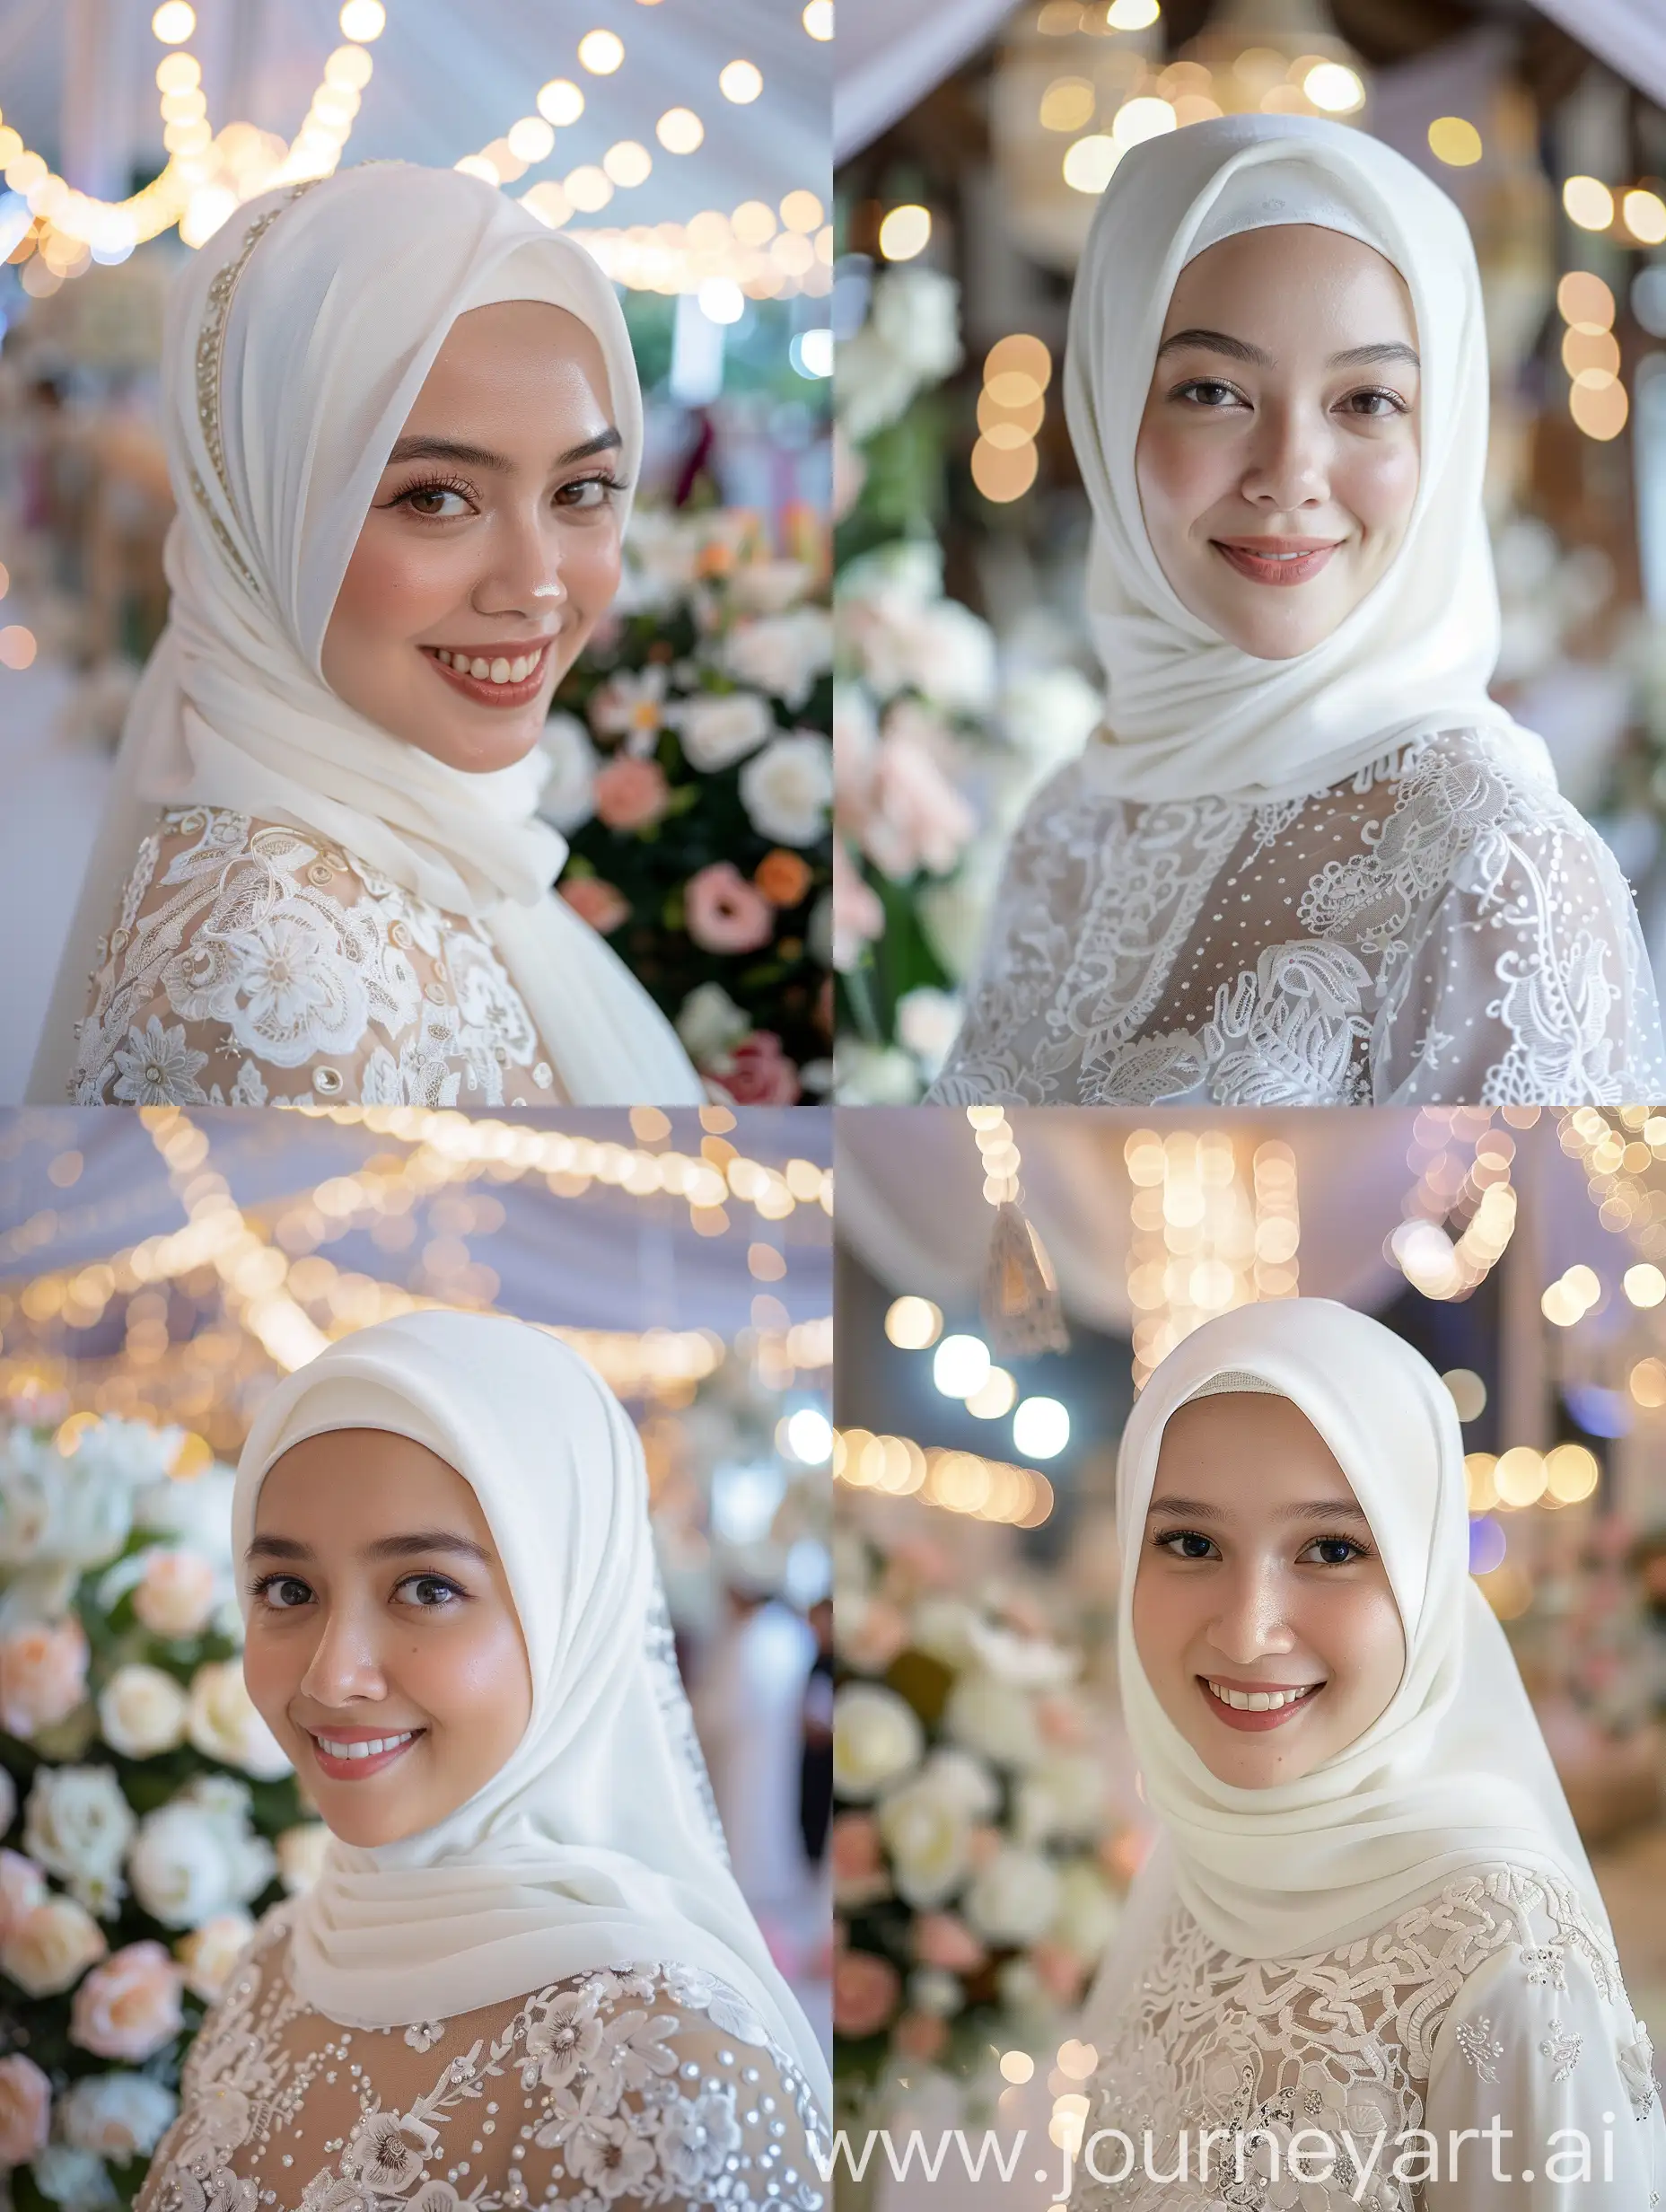 Indonesian-Woman-in-Traditional-Attire-Smiling-at-Wedding-Venue-with-Flowers-and-Lights